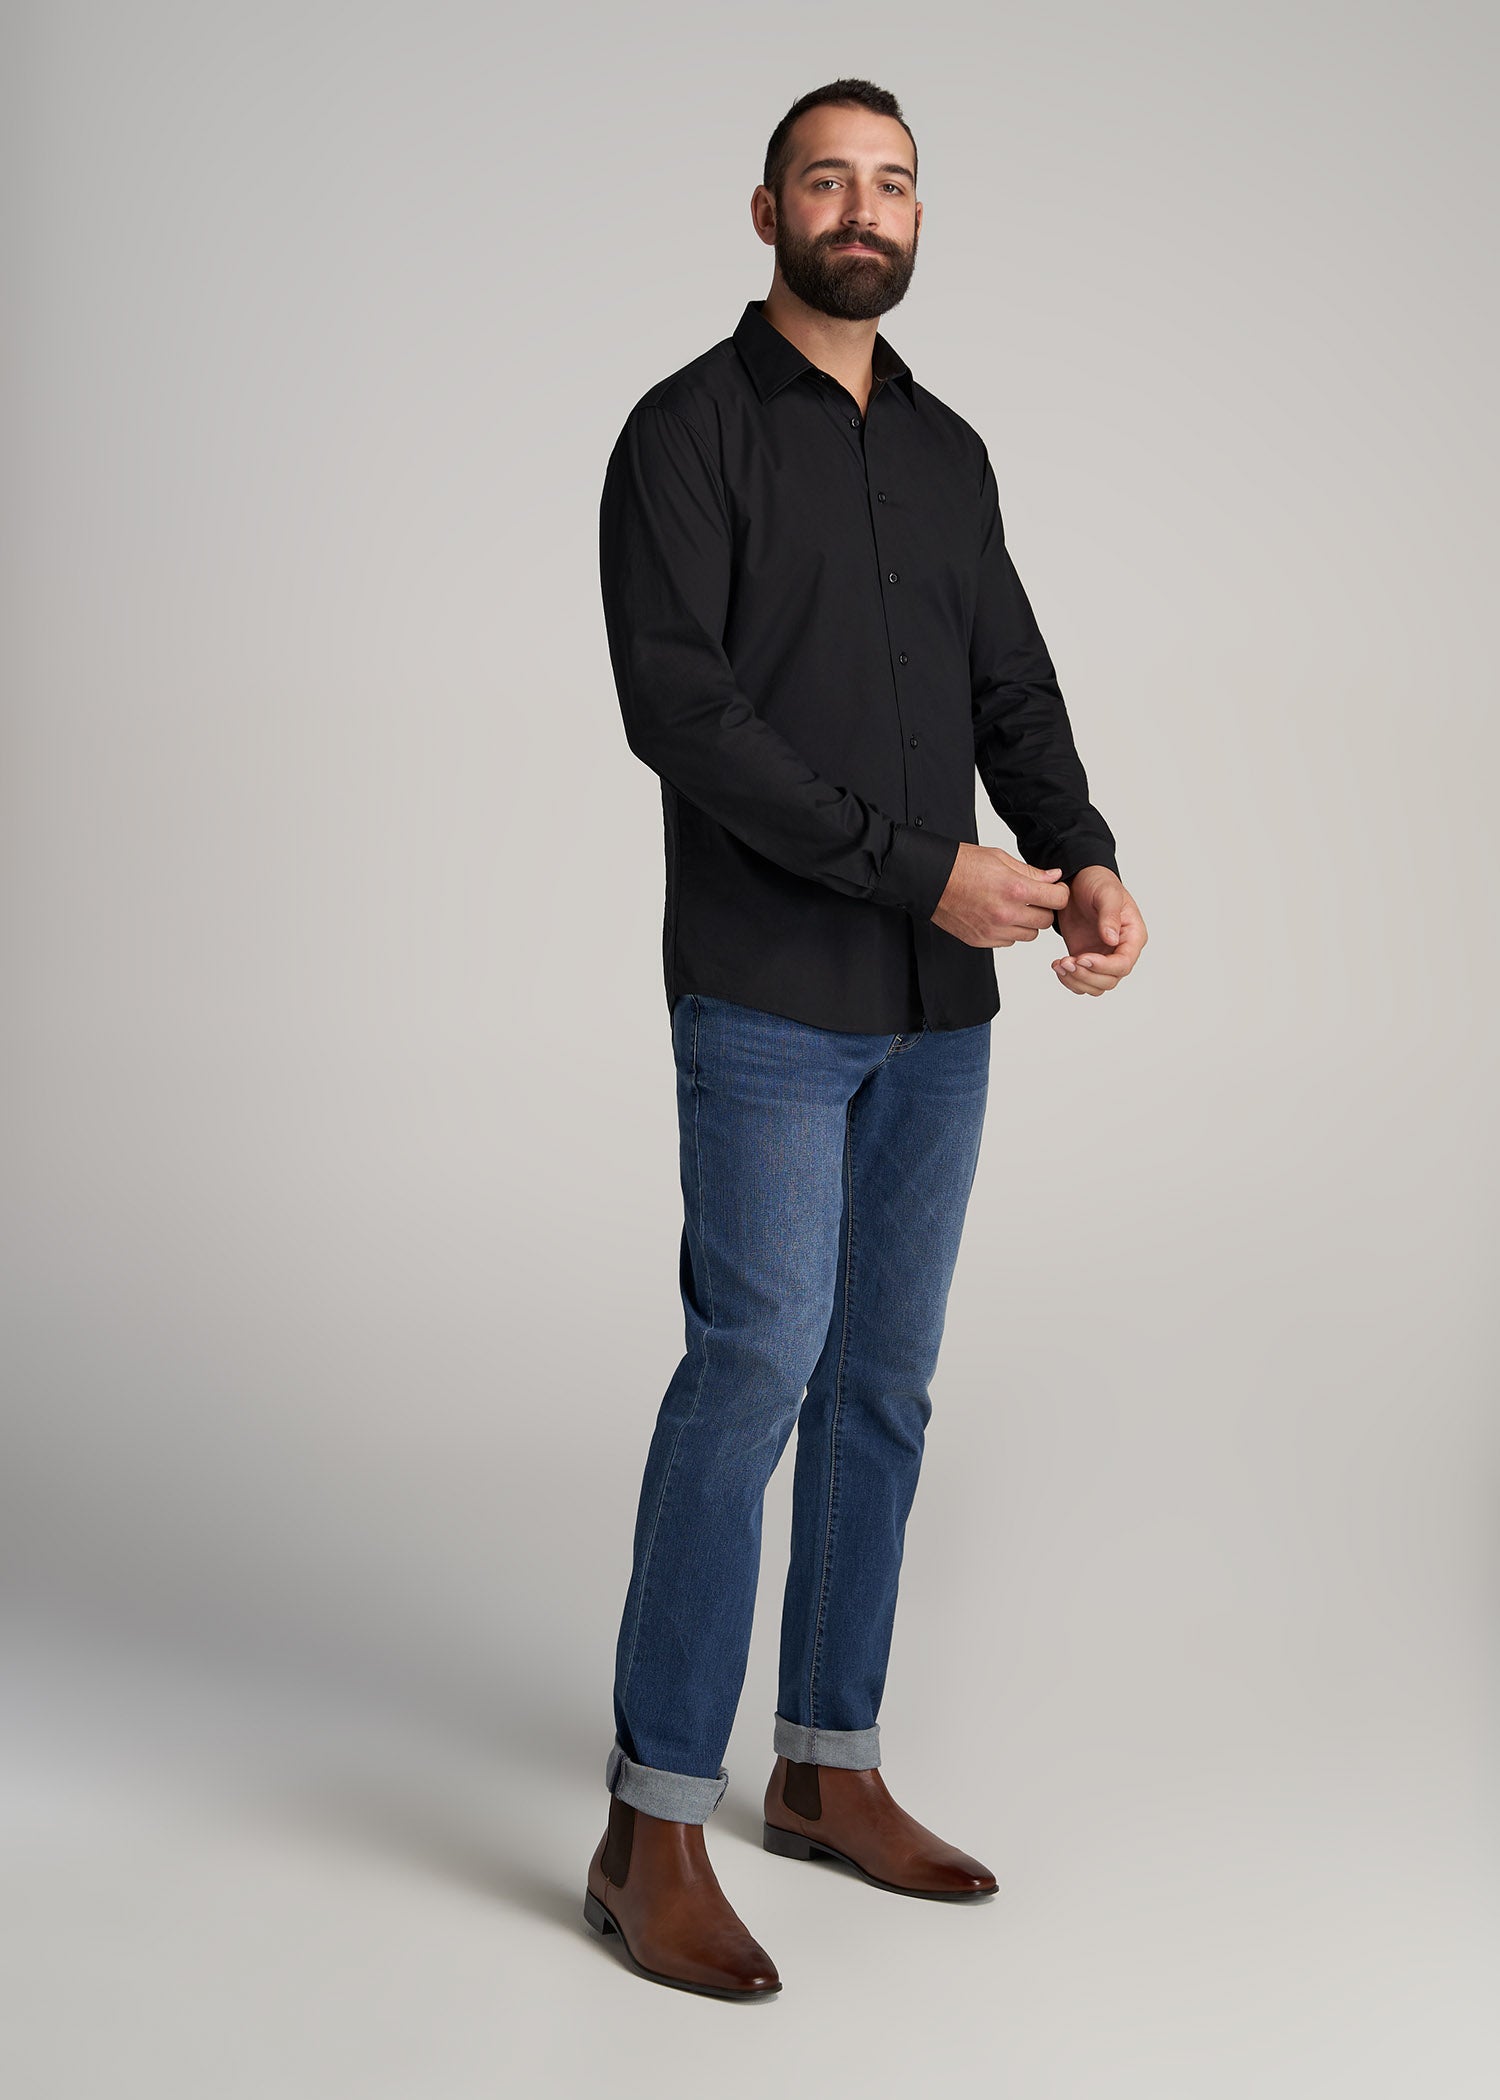 A tall man wearing American Tall's Oskar Button-Up Shirt for Tall Men in Black and Tapered Jeans for Tall Men in Blue-Steel.